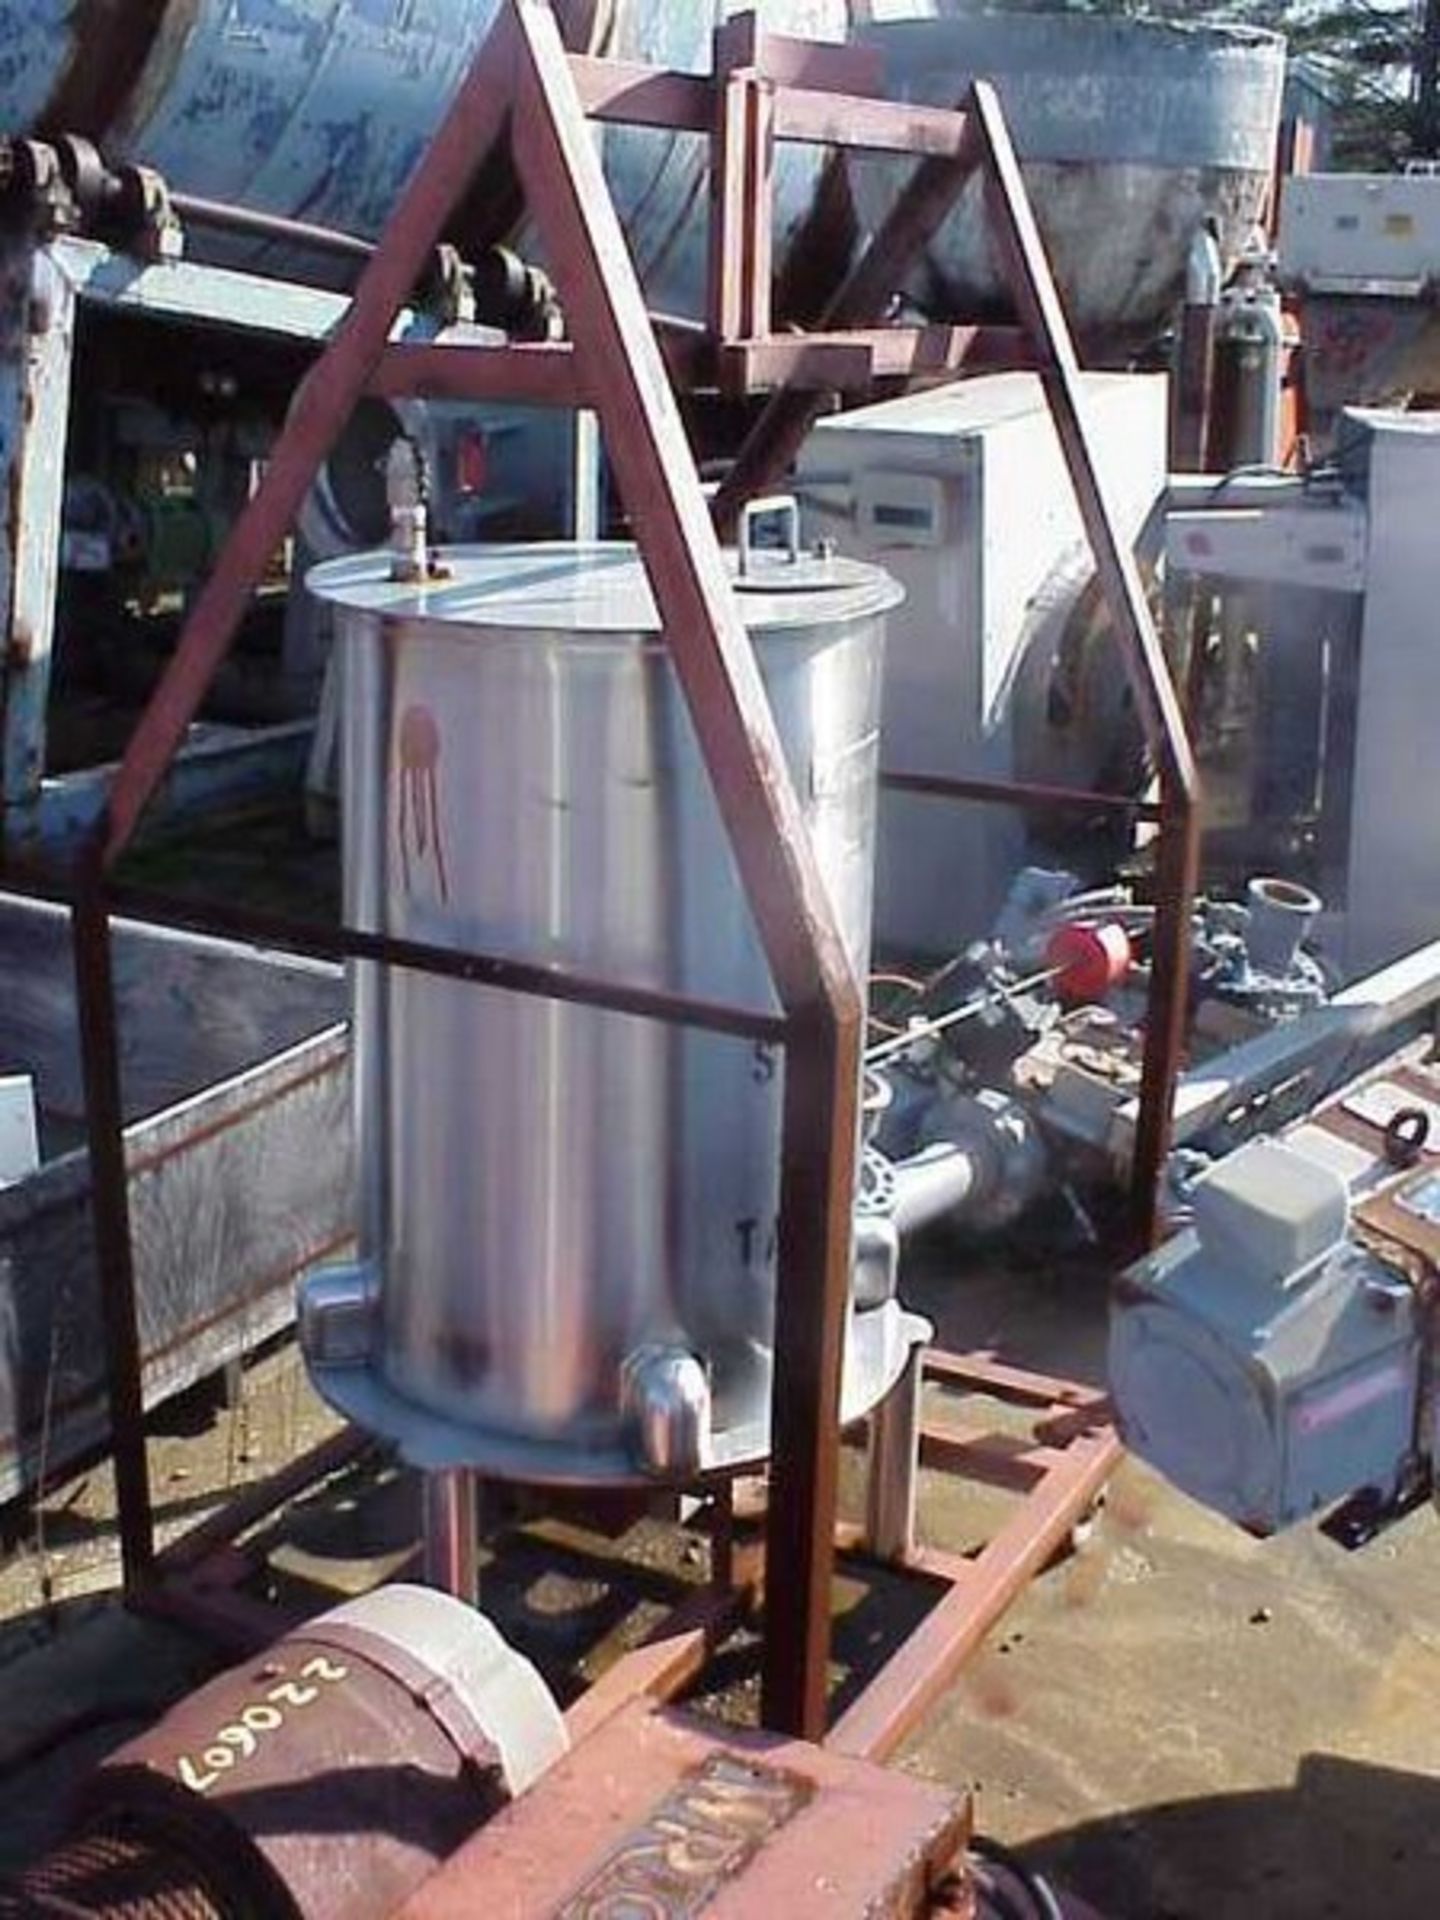 United Utensils Co (UTENSCO) 65 Gal S/S Tank, S/N 02008-3 with Material 304SS, Bottom Mounted 3 hp - Image 2 of 3